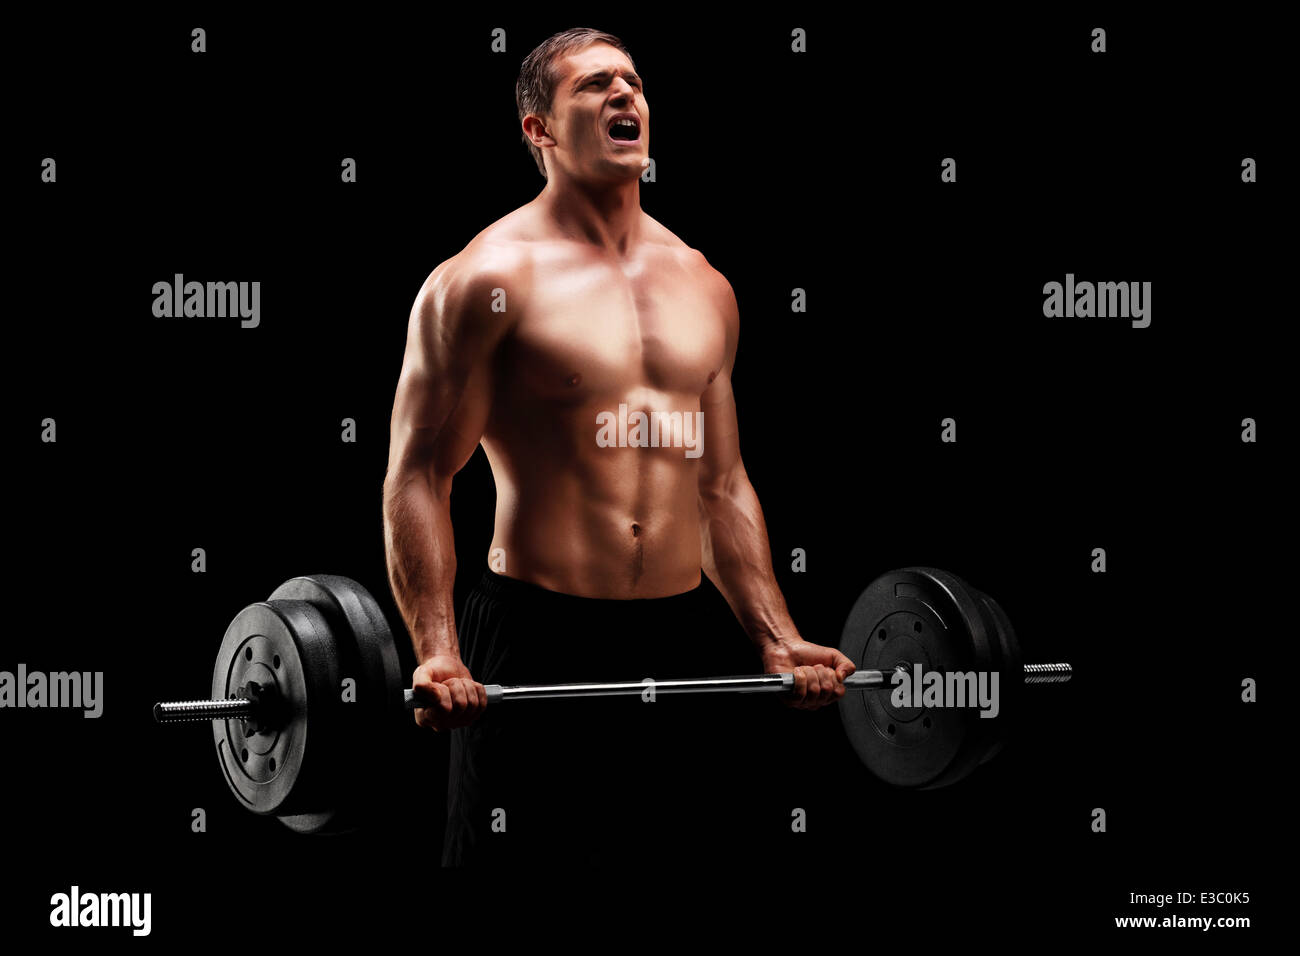 Bodybuilder exercising with a barbell Stock Photo